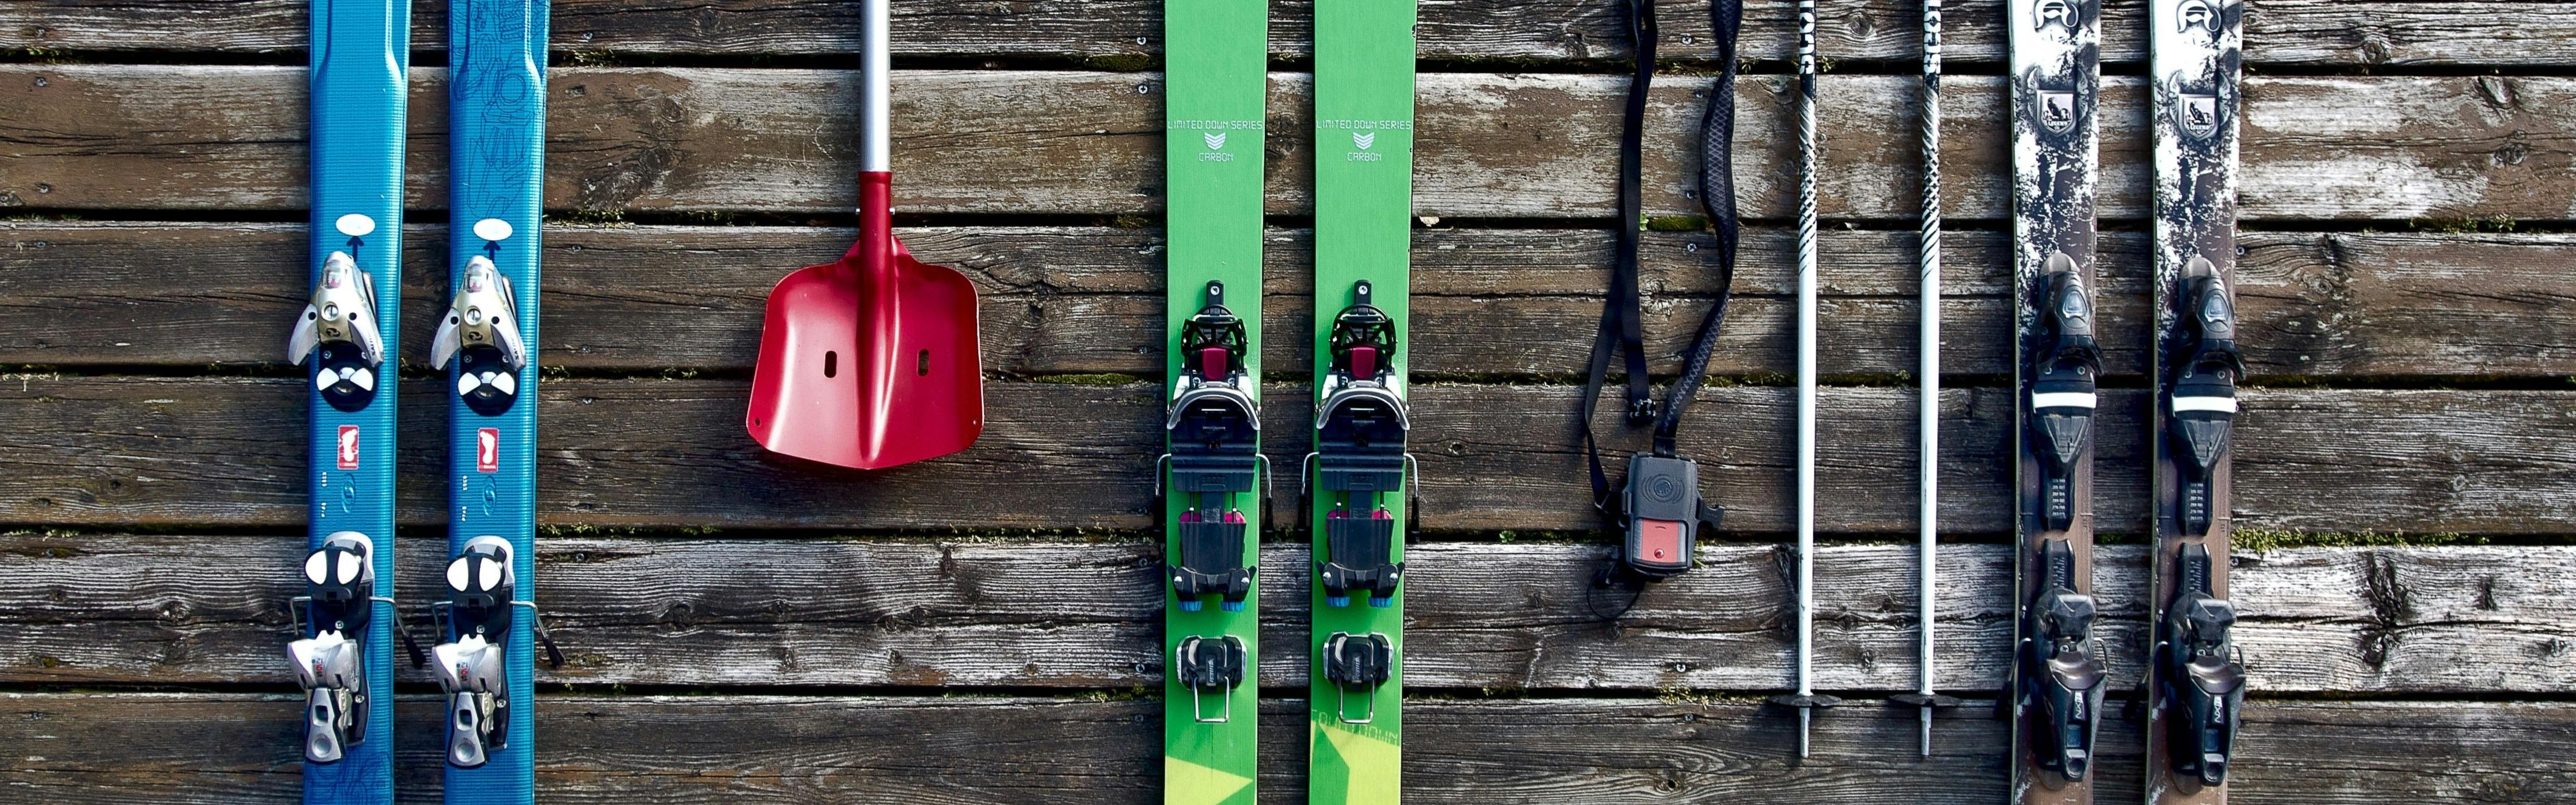 Three pairs of skis and a shovel laying on a wooden plank ground.